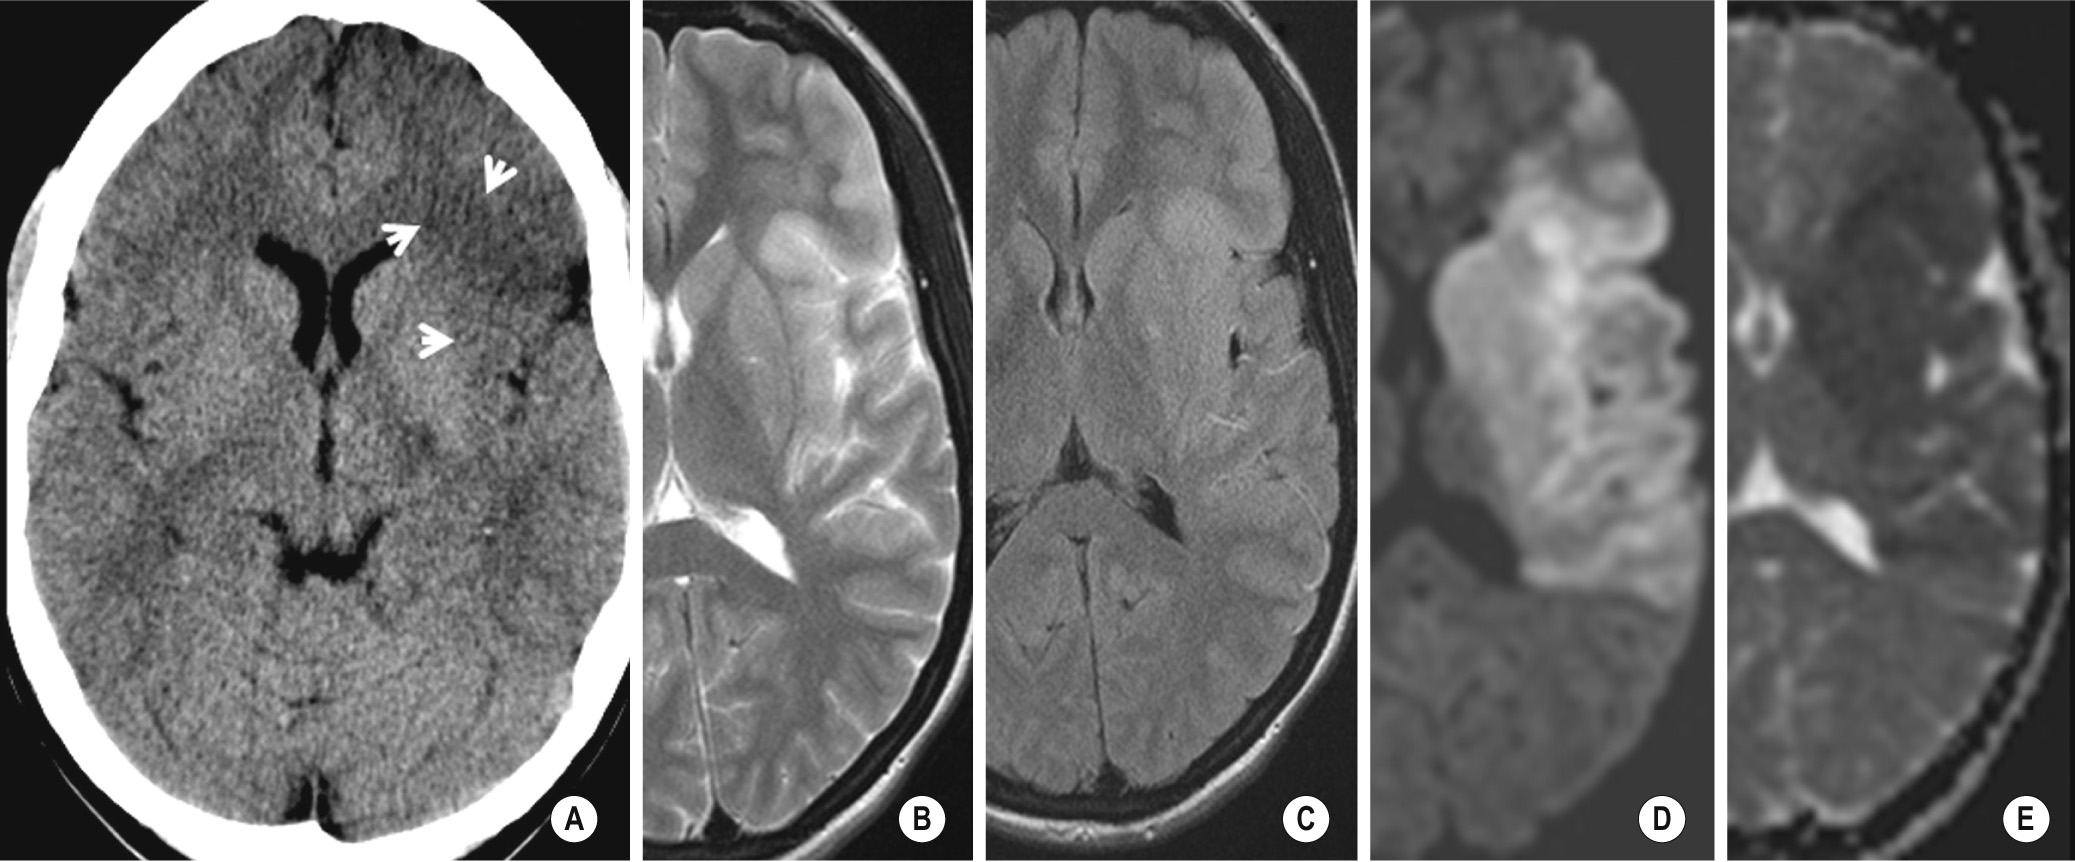 An acute left MCA territory infarct presenting 7 h after onset is visible on CT (A) as low attenuation in the left frontal operculum and left insula. At this stage, not only is the infarct shown as T2 hyperintensity and gyral swelling but also more extensive involvement of the left MCA territory is identified on T2-weighted and FLAIR imaging (B, C). However, the full extent of involvement—including the basal ganglia—is only clearly demonstrated on DWI (D) as hyperintensity and on the corresponding ADC map (E) as hypointensity. **